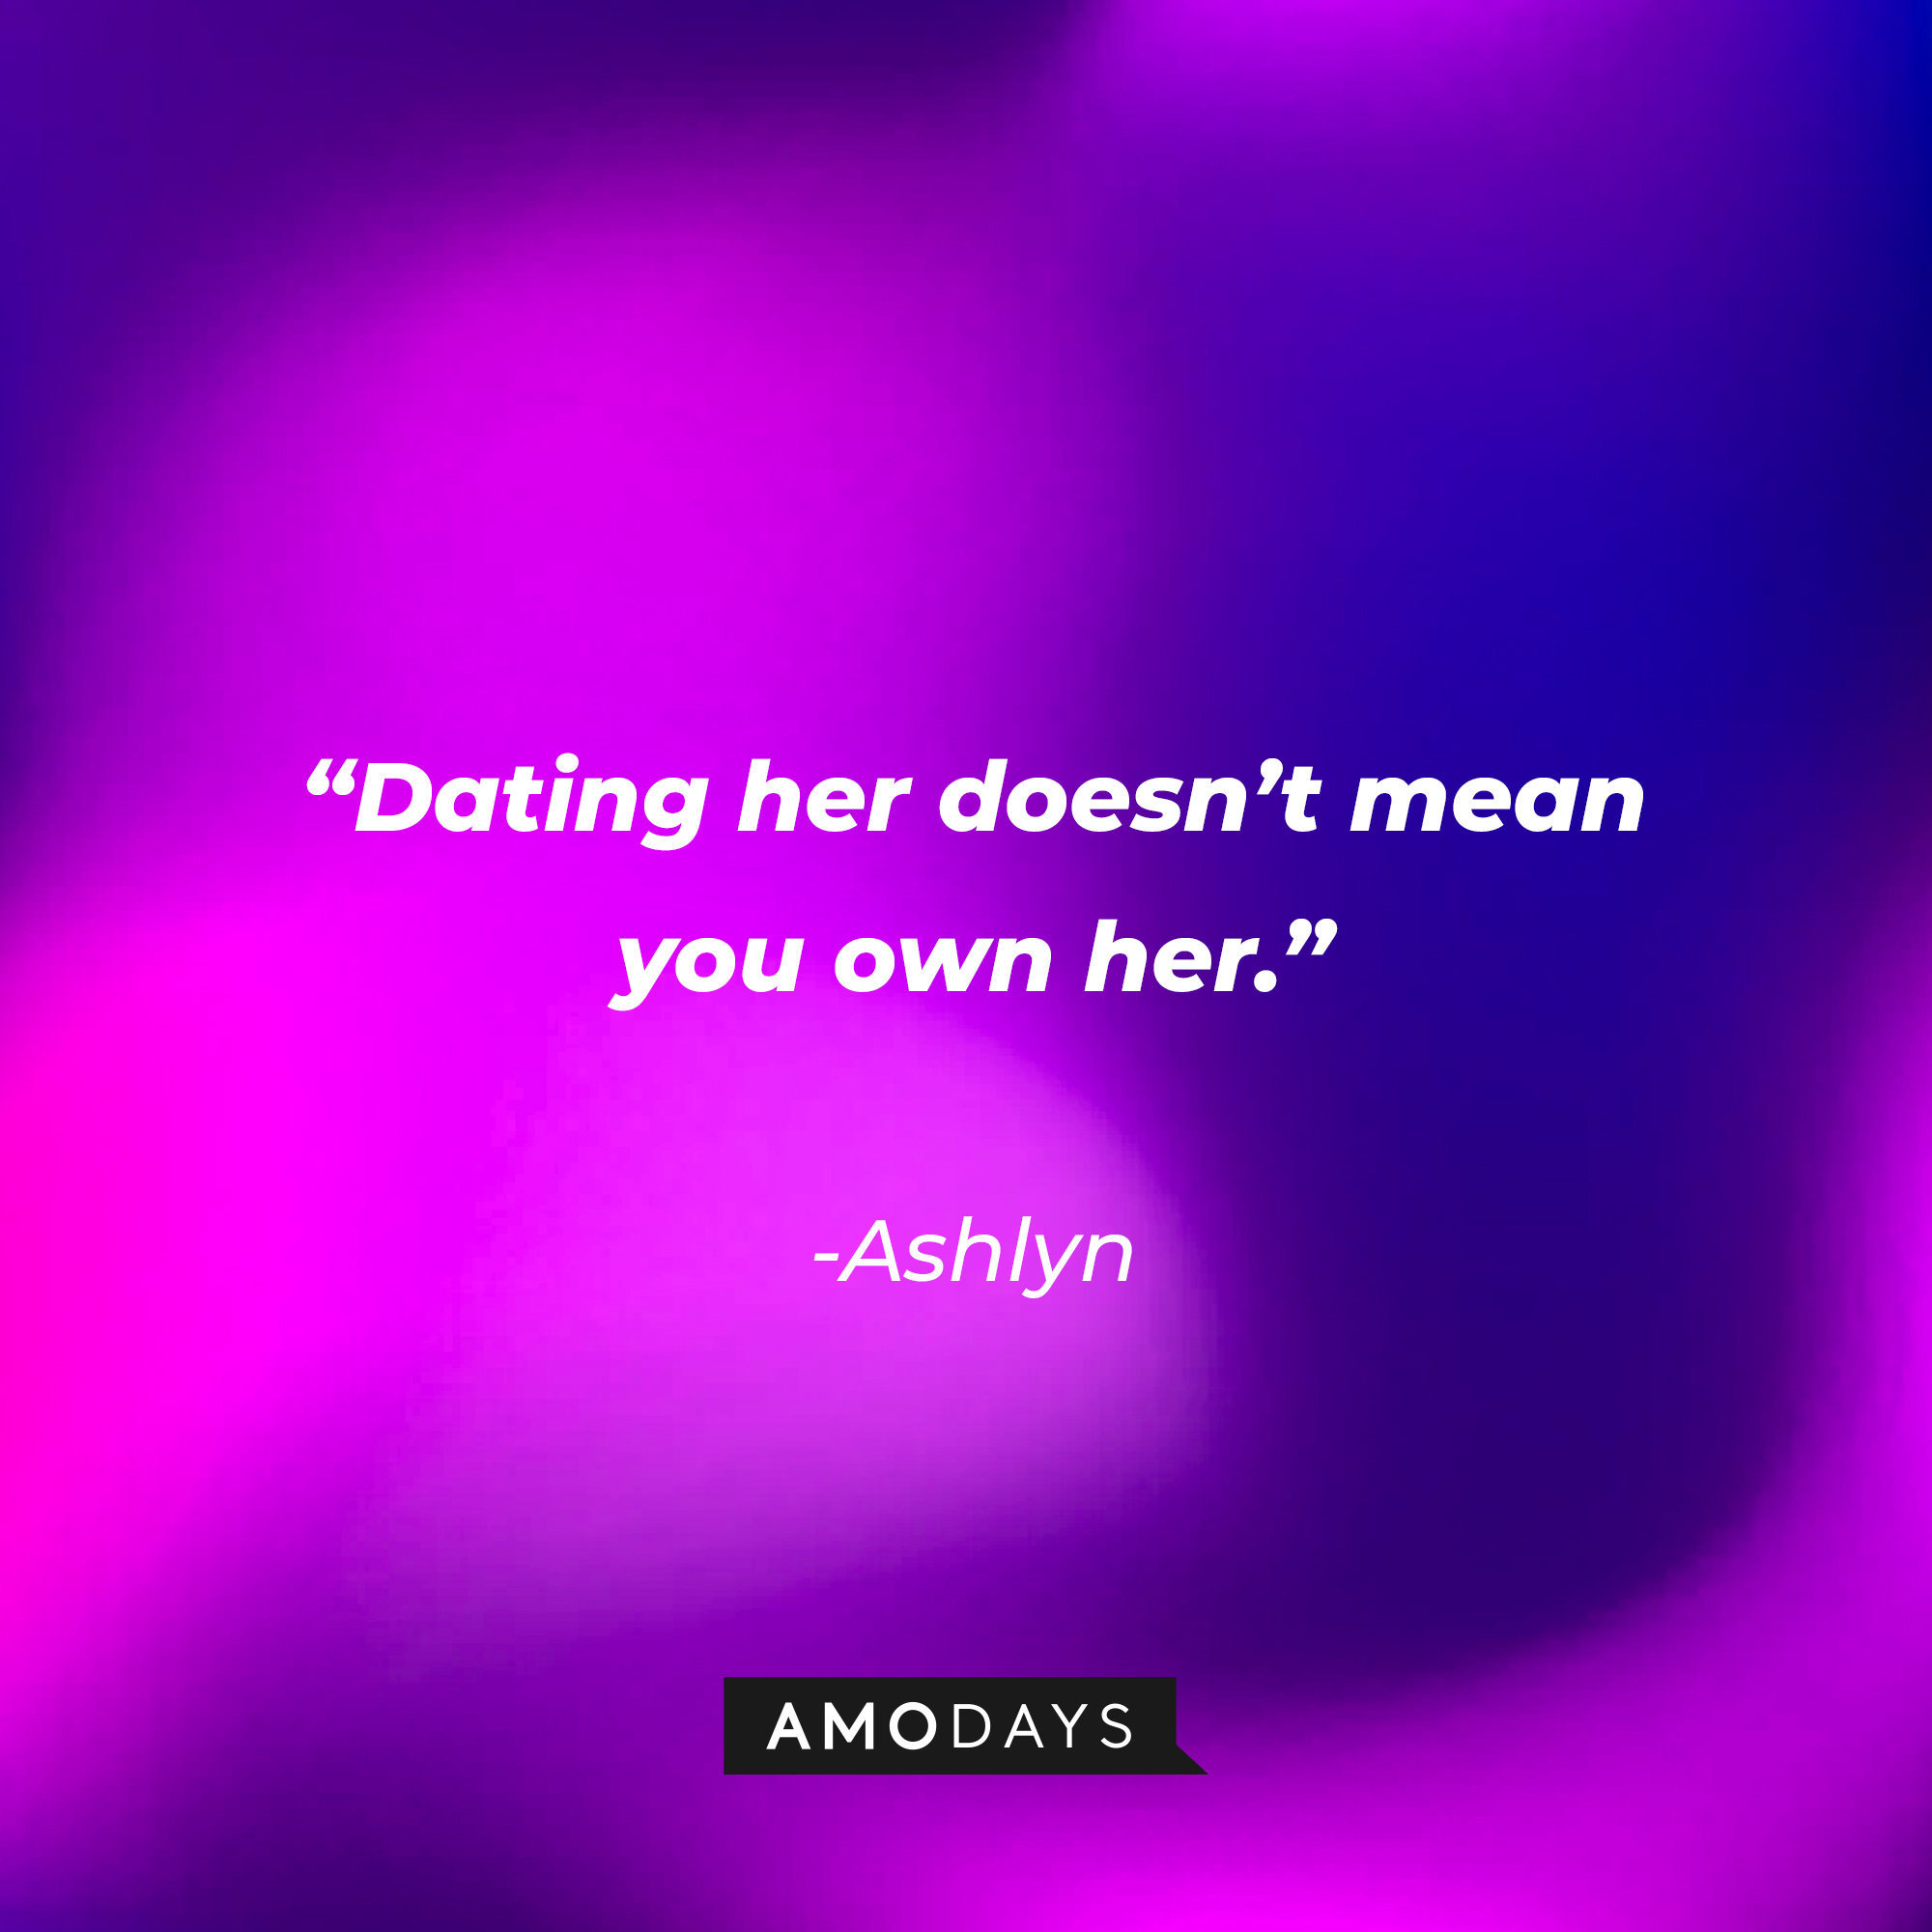 Ashlyn’s quote: "Dating her doesn’t mean you own her." | Source: AmoDays